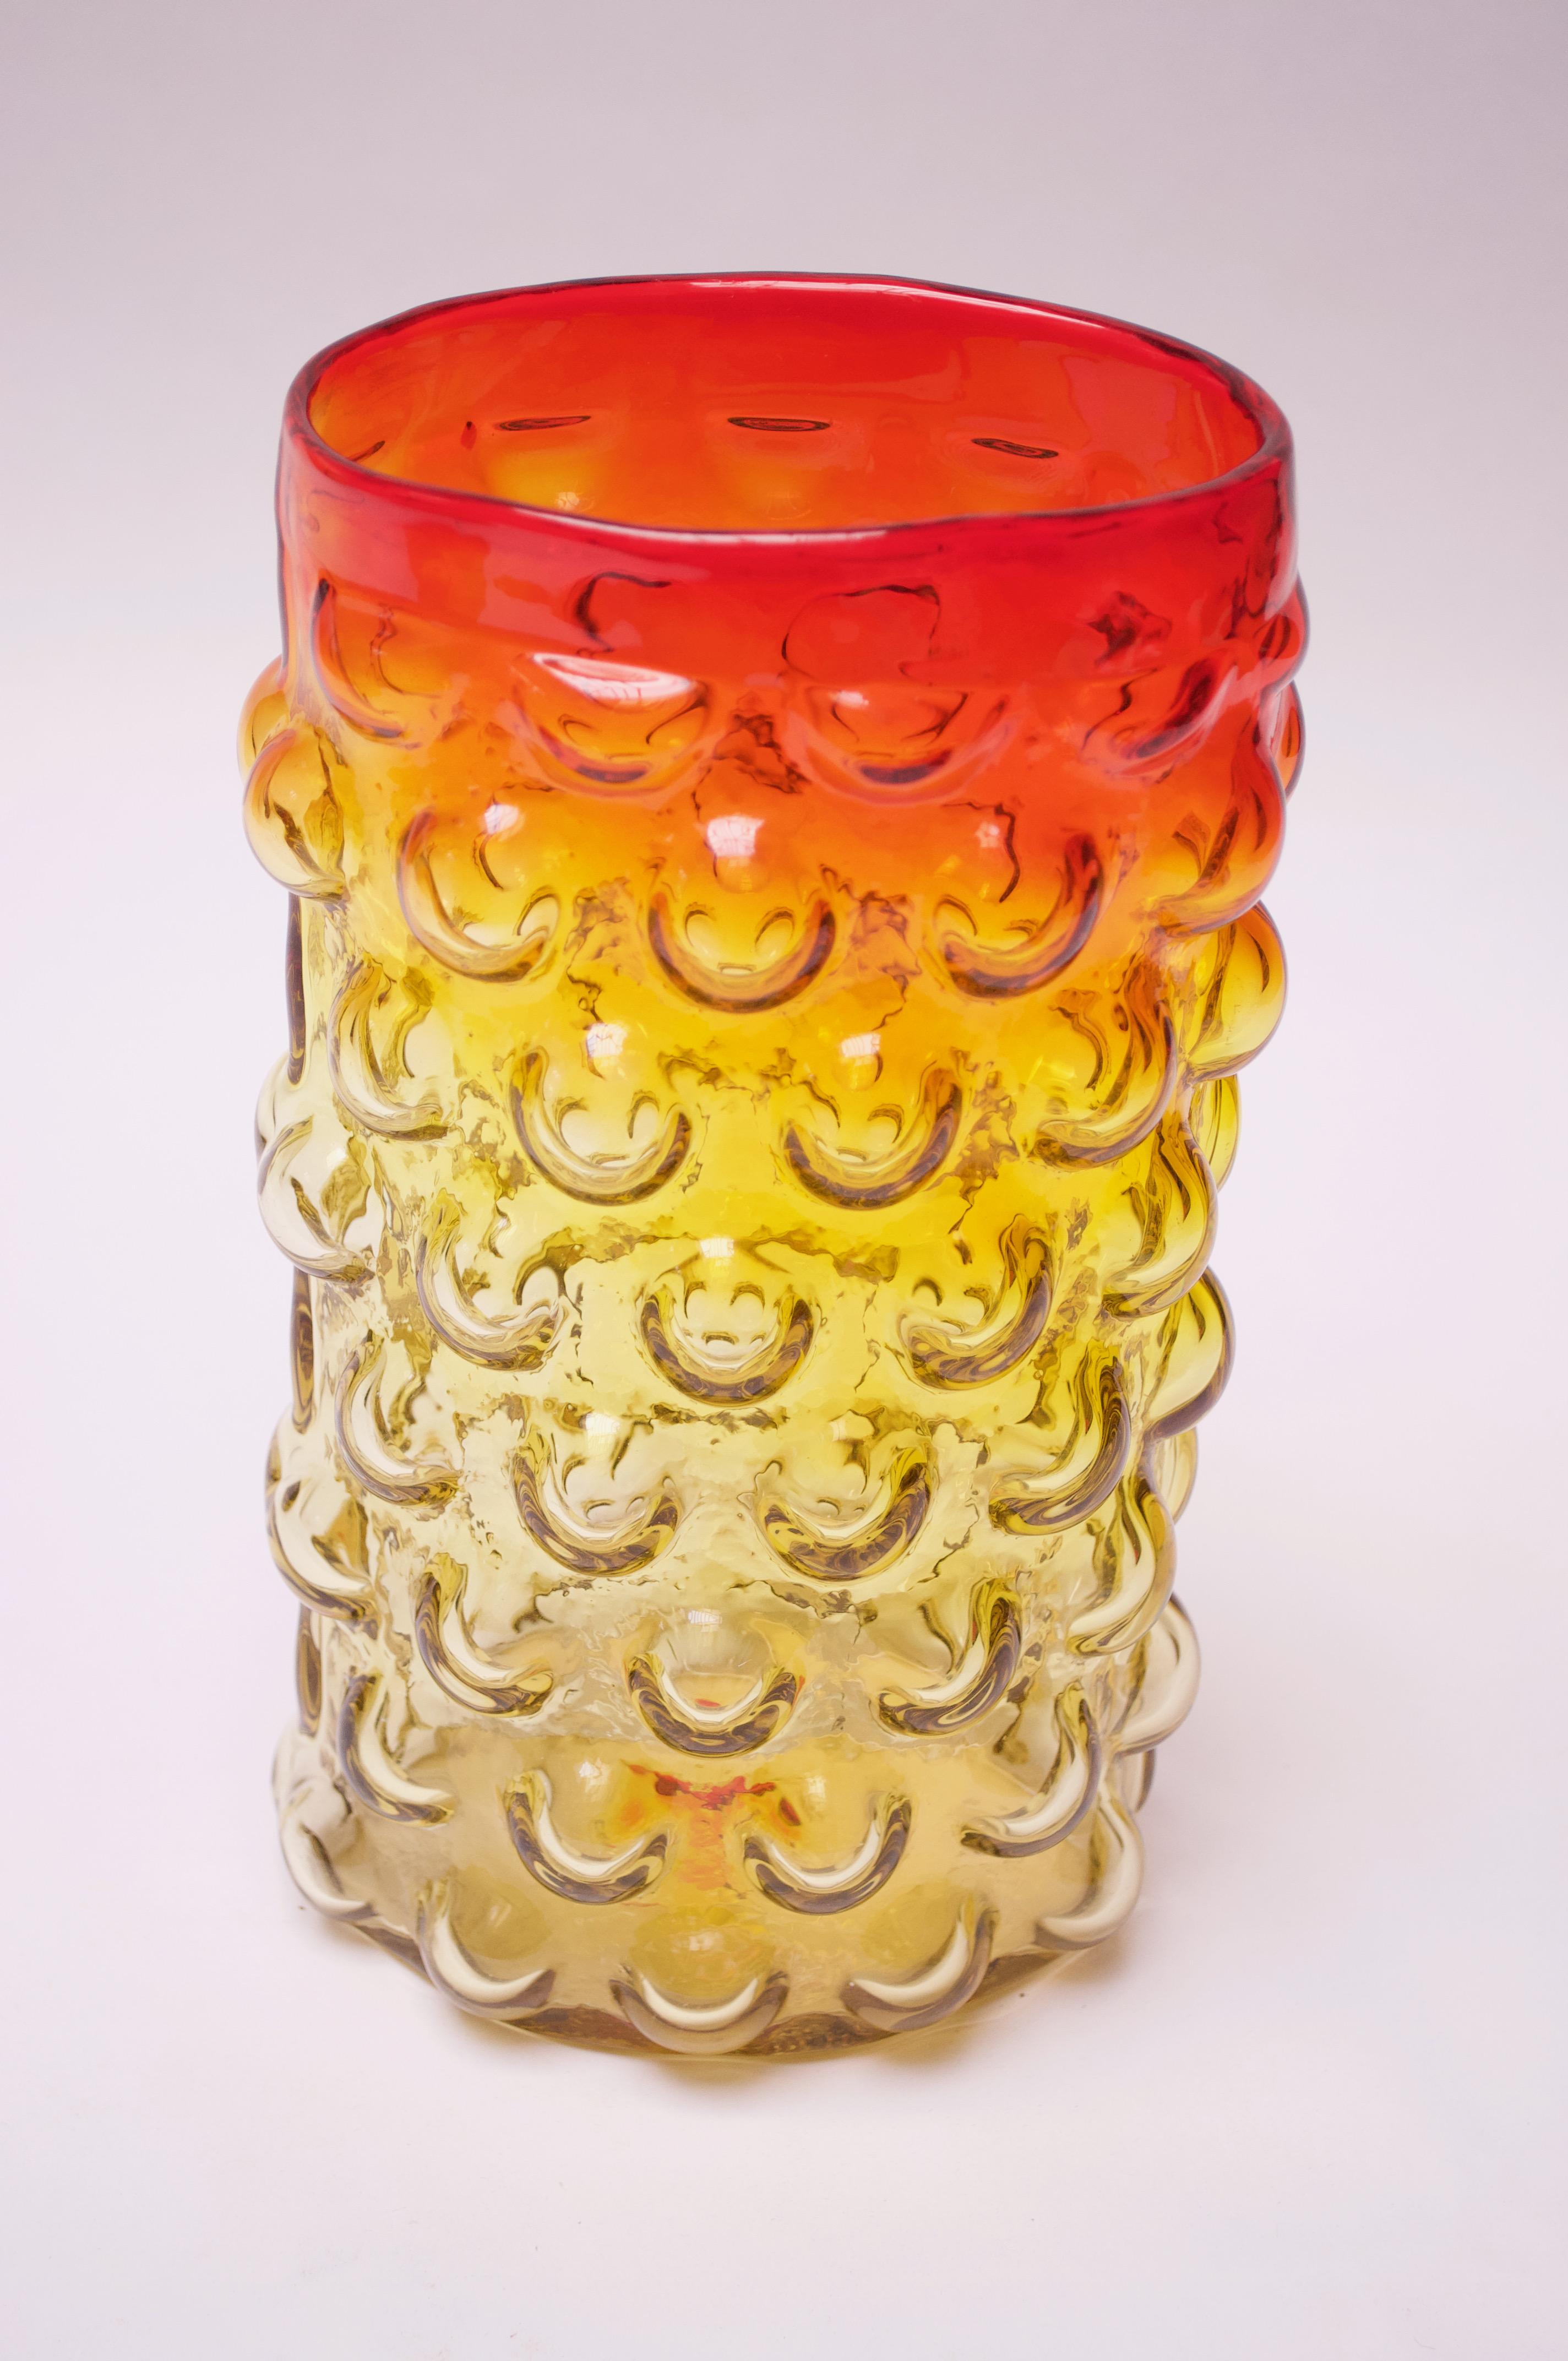 Blown glass vase designed in 1961 by Wayne Husted for Blenko (model number 6041). Attractive 'bubble' pattern throughout and brilliant amberina / tangerine palette with red and yellow meeting to produce an orange banding toward the top. 
Features